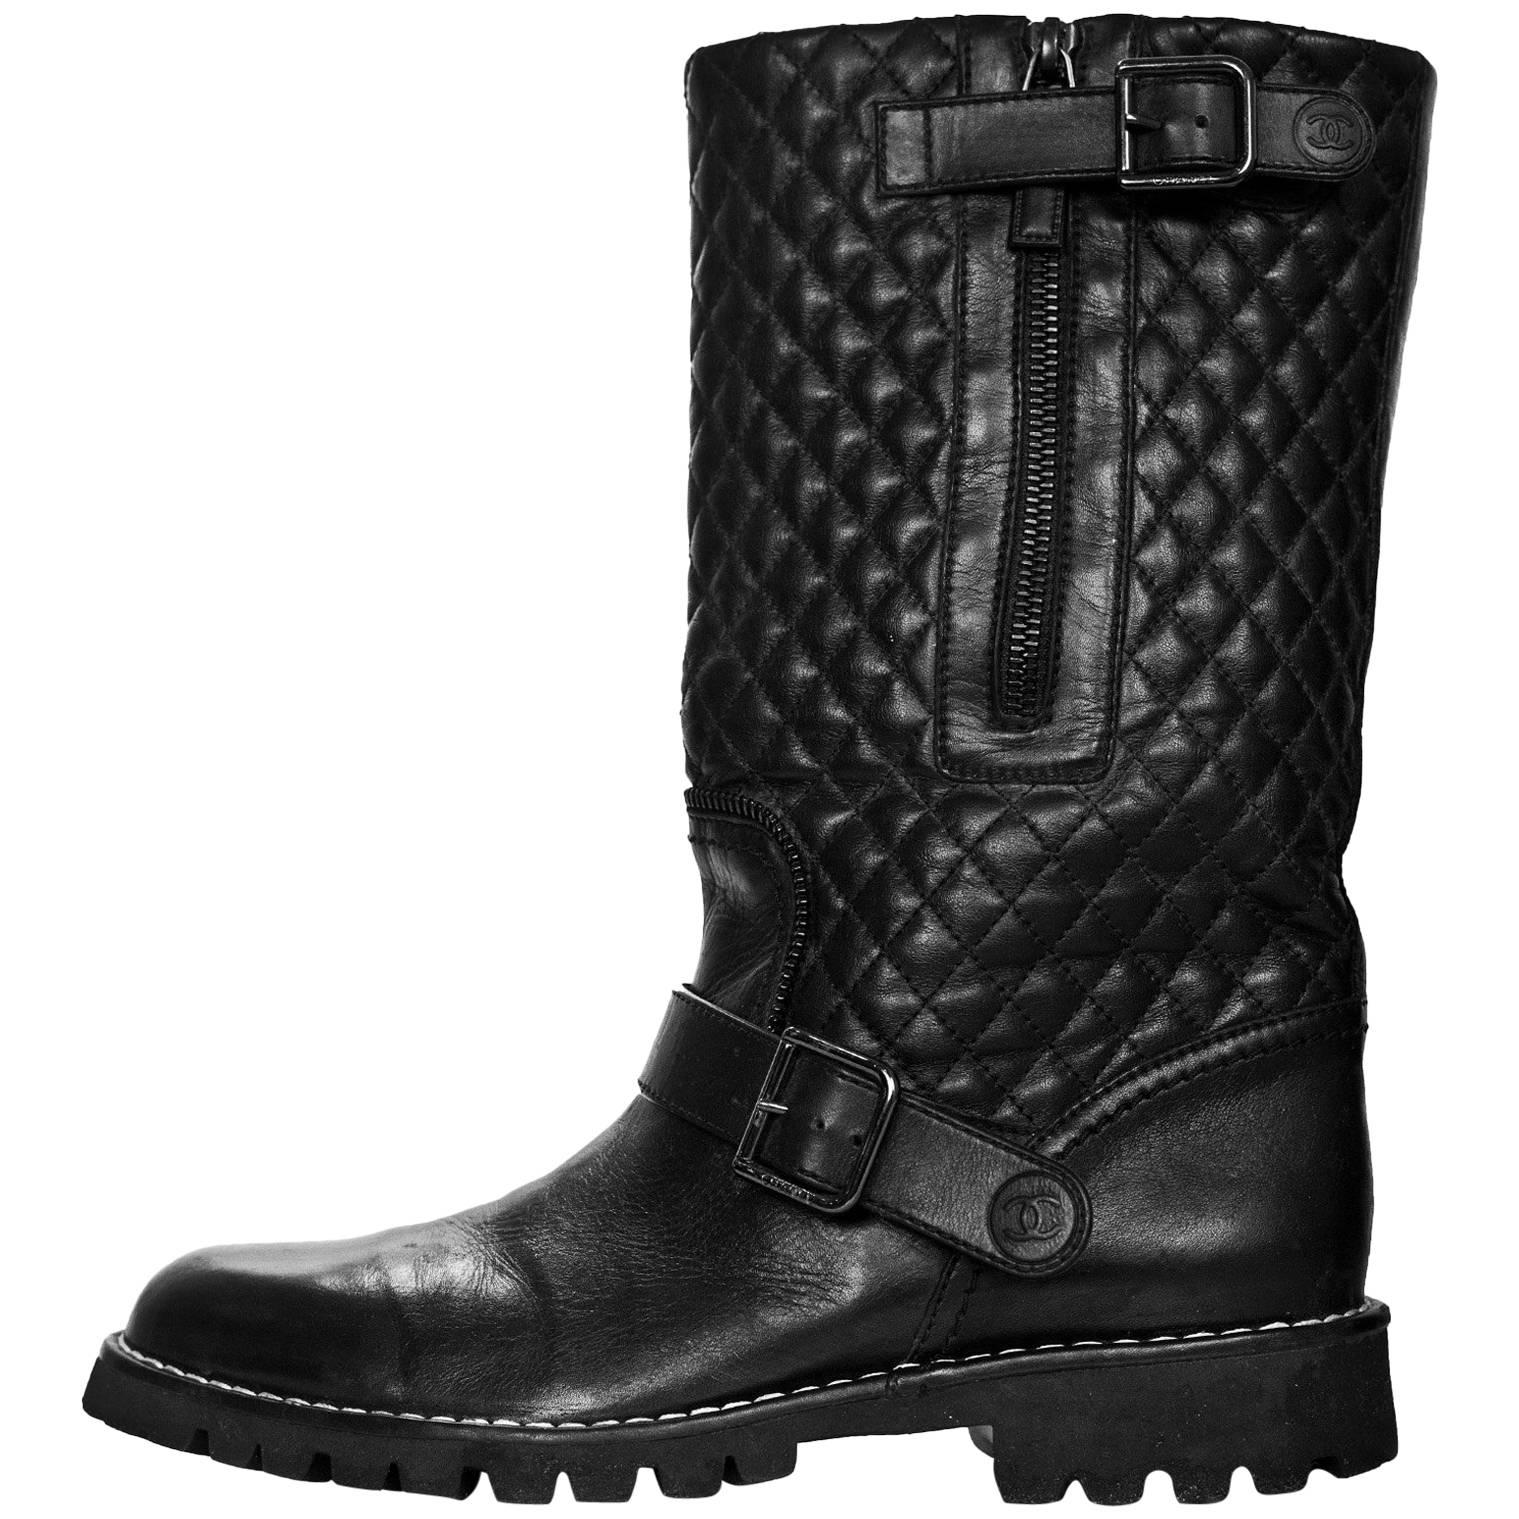 Chanel Black Quilted Leather Biker Boots Sz 40